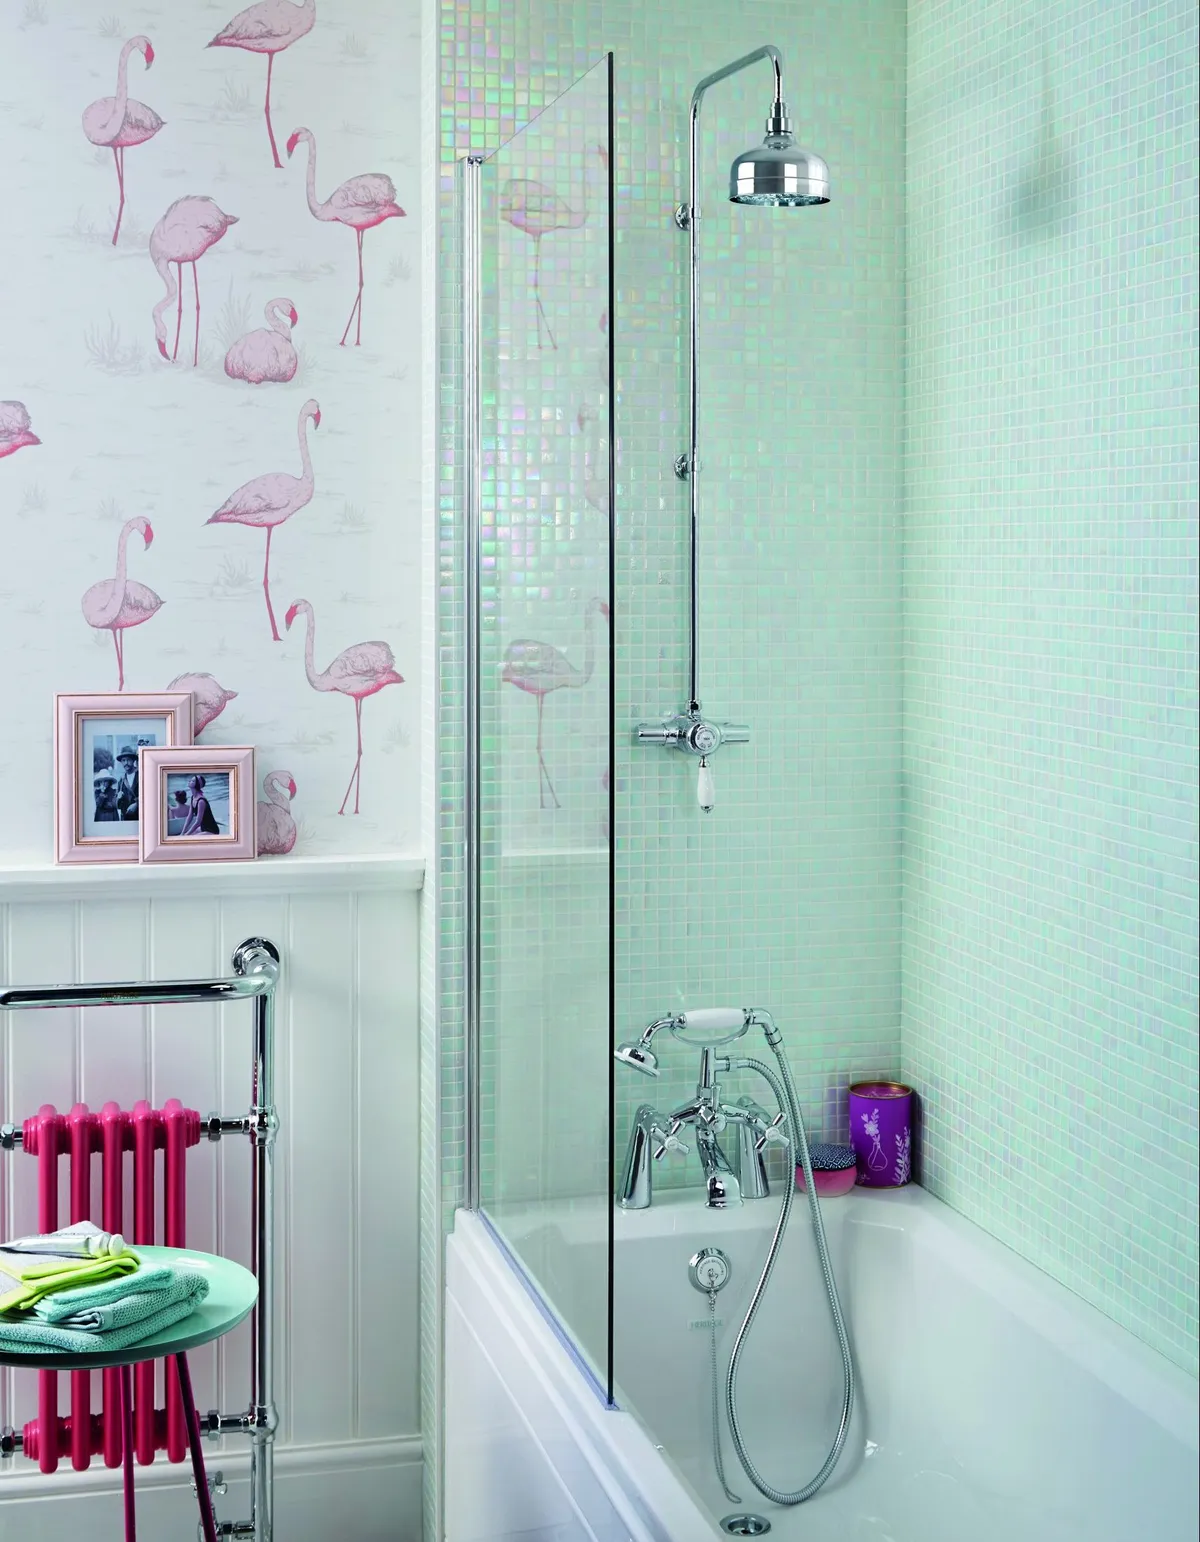 This exposed thermostatic shower features a specialised eco-flow to limit the use of water to a maximum of 8.5 litres per minute, which is especially important in areas with high water pressure Ryde dual control mini valve with fixed kit in Chrome, £420, Heritage Bathrooms